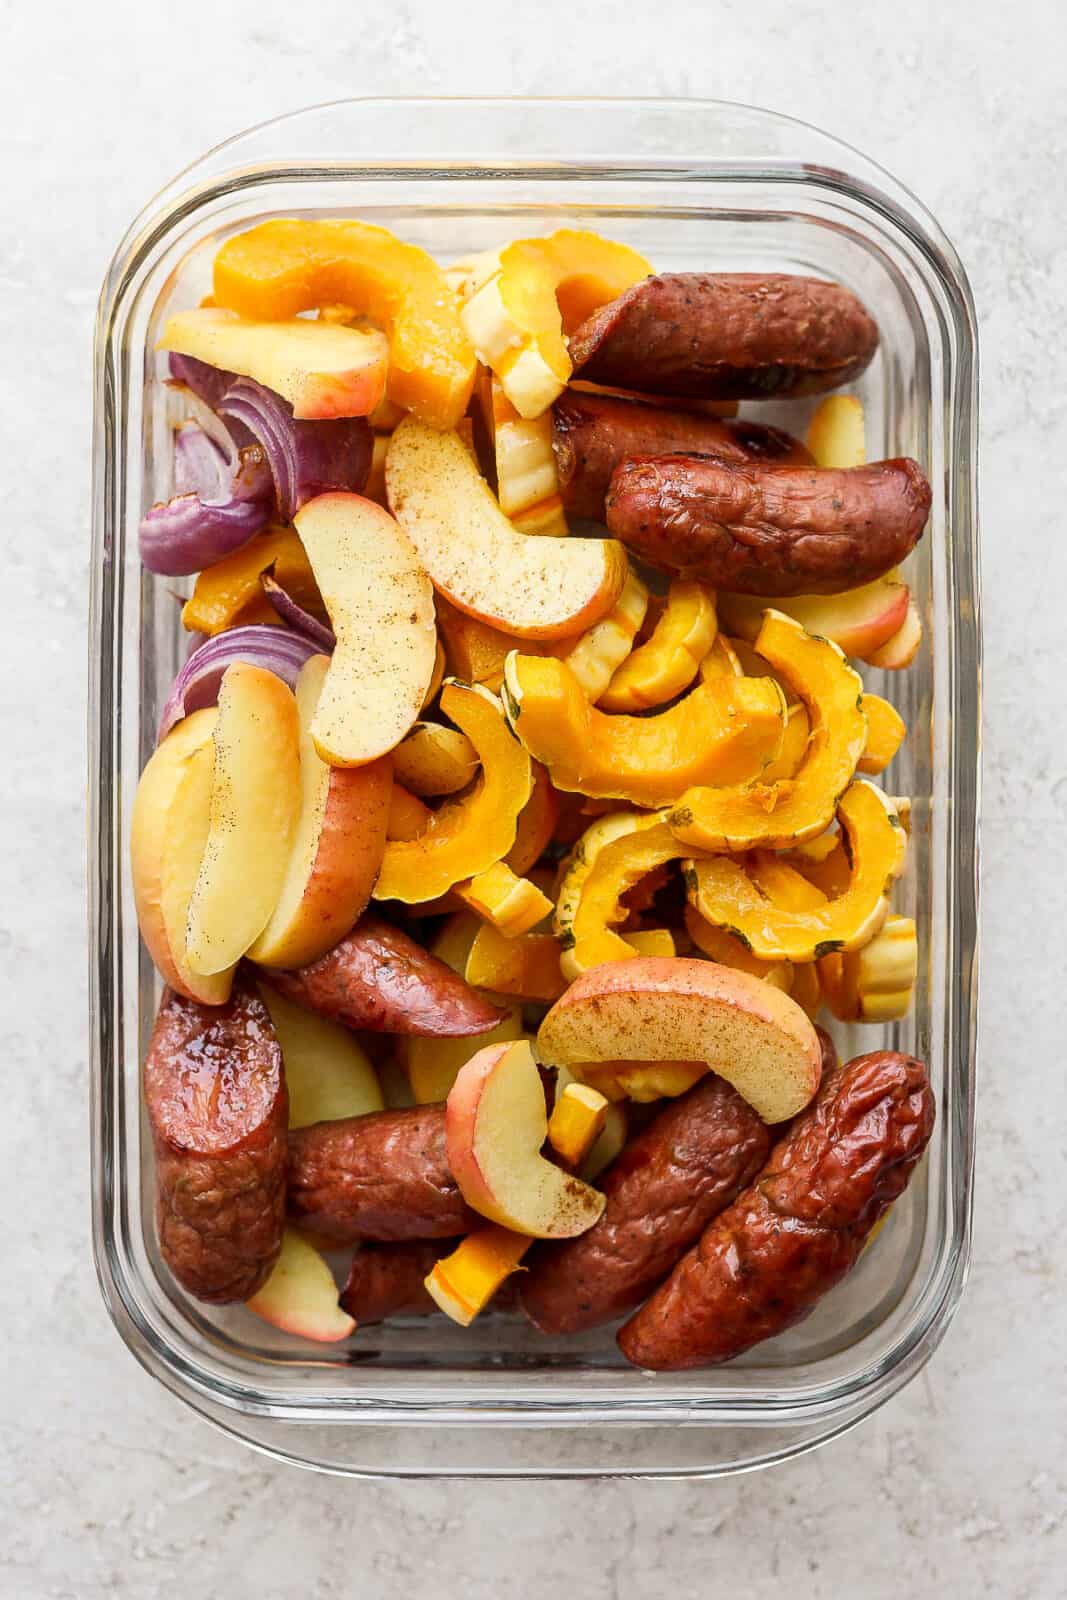 The sausage sheet pan meal in a container to go in the fridge.